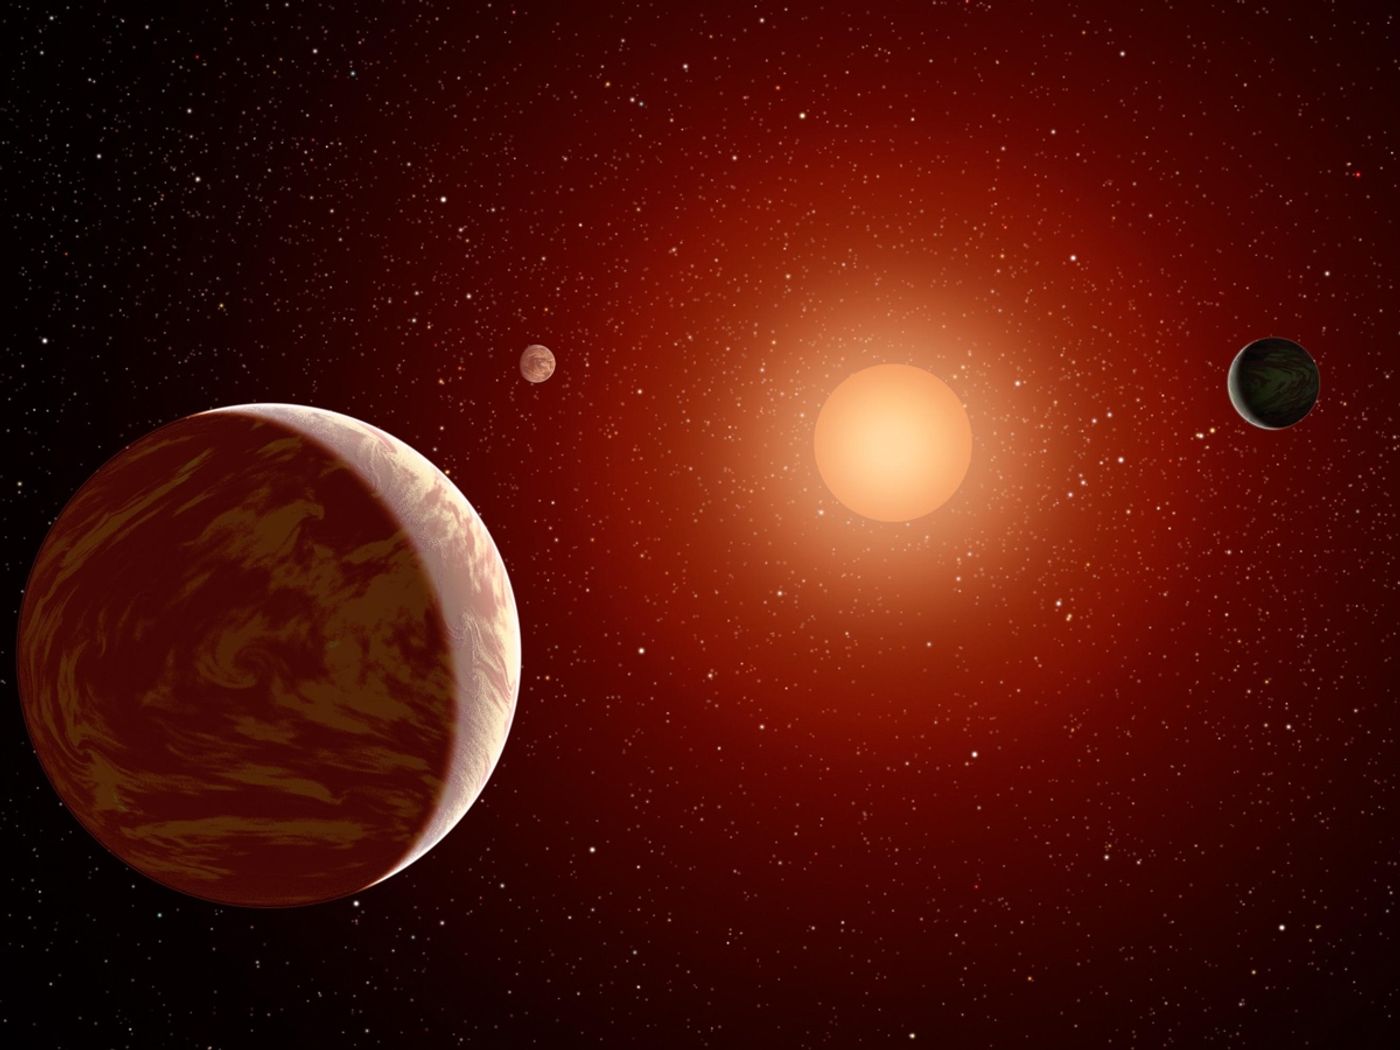 TRAPPIST-1 has three Earth-like exoplanets, one of which is in the habitable zone, and we want to know how big it is.